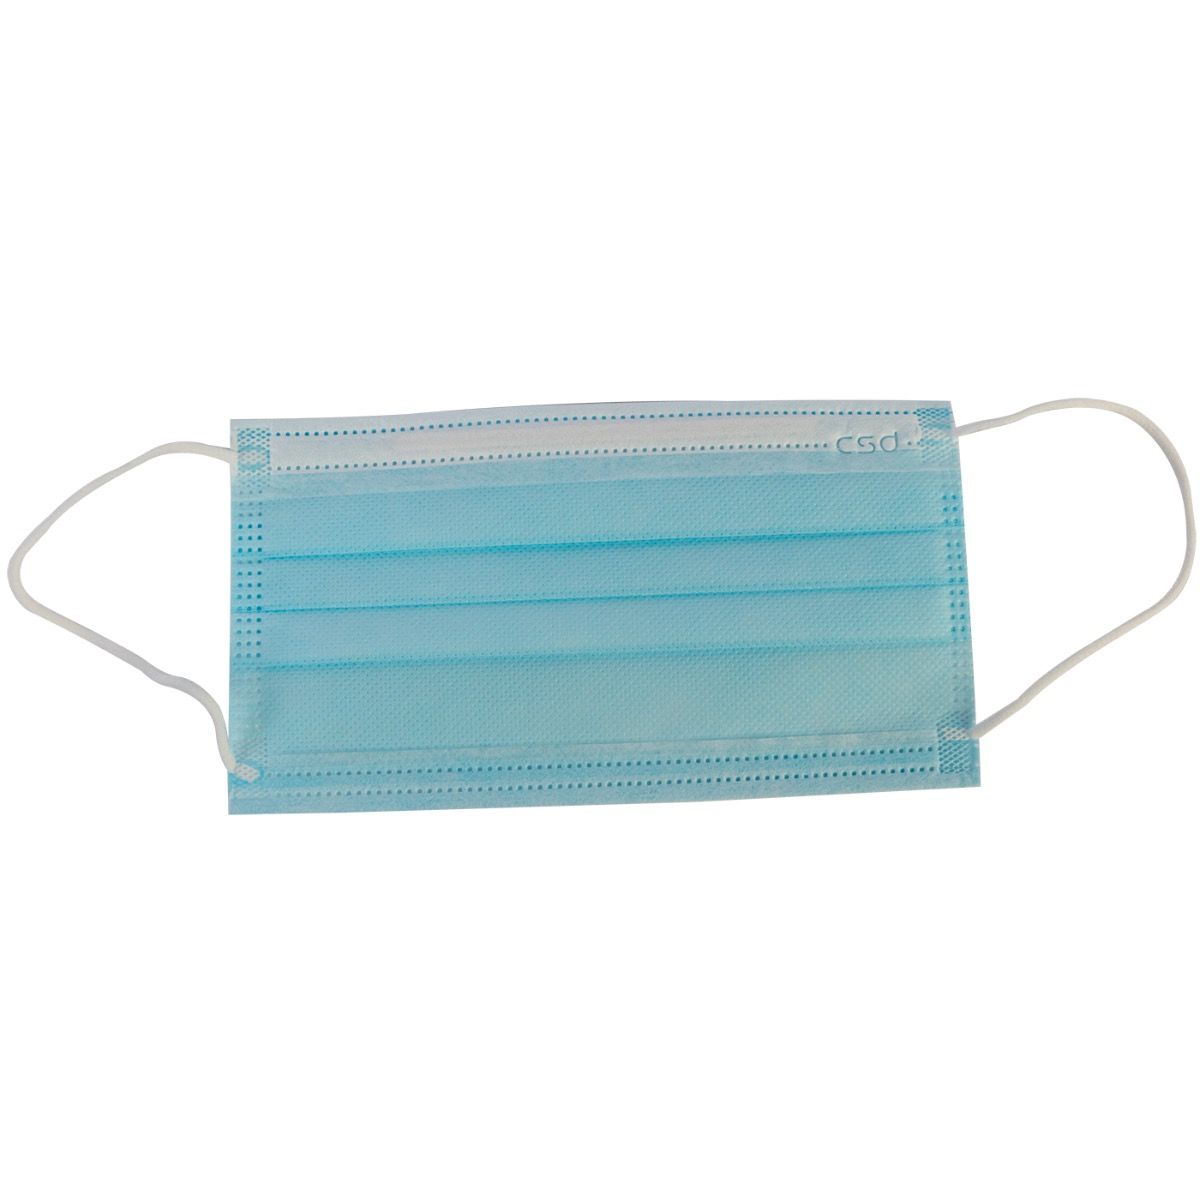 DISPOSABLE SURGICAL MASK - LEVEL 3 (BOX OF 50)